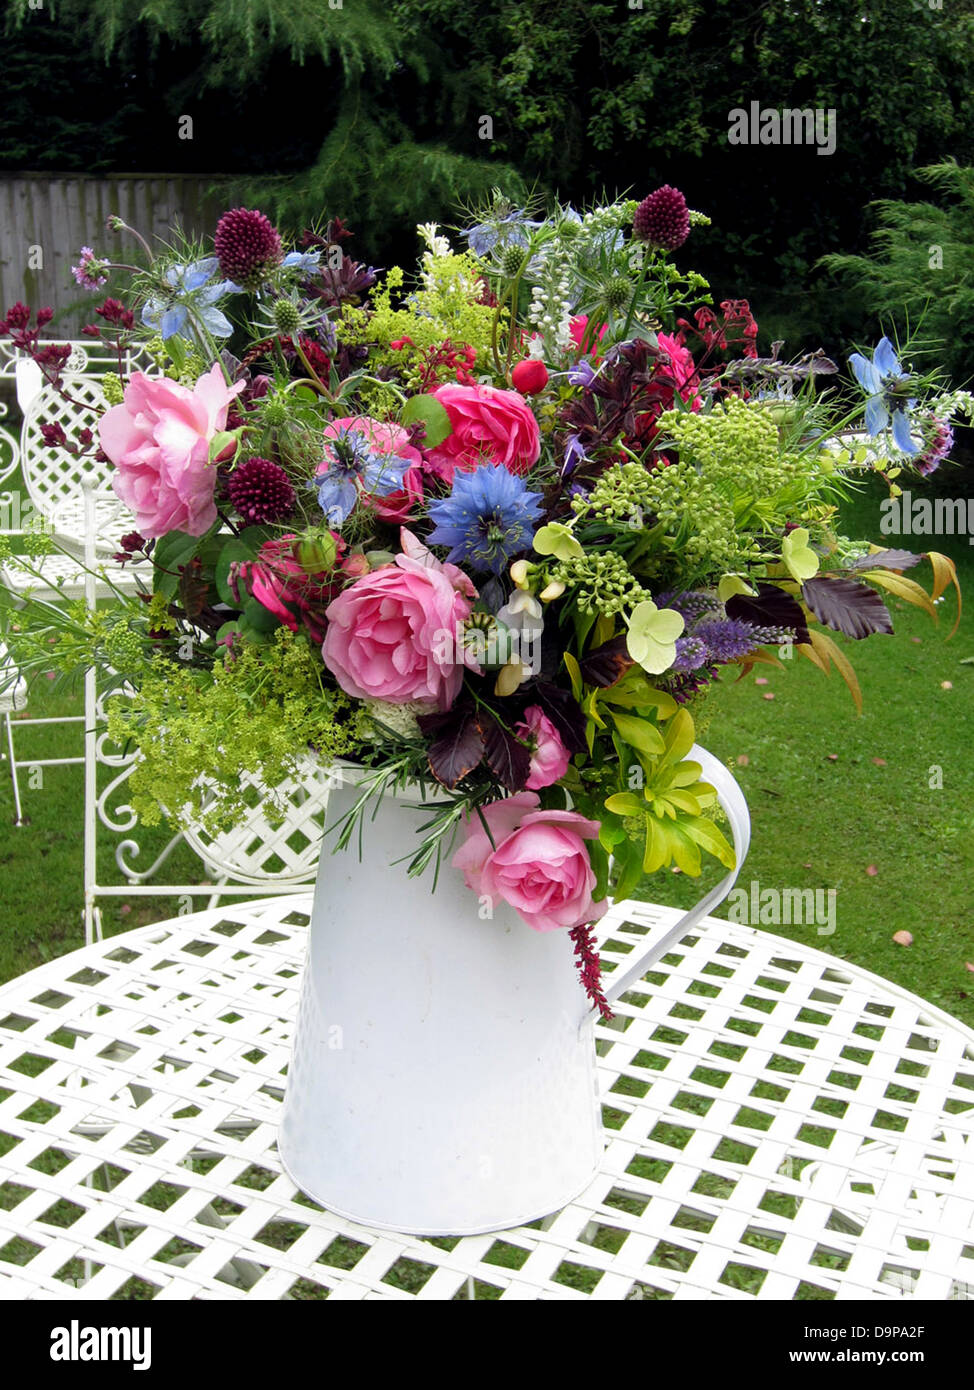 A selection of English garden flowers in a simple white vase in an English garden. Stock Photo